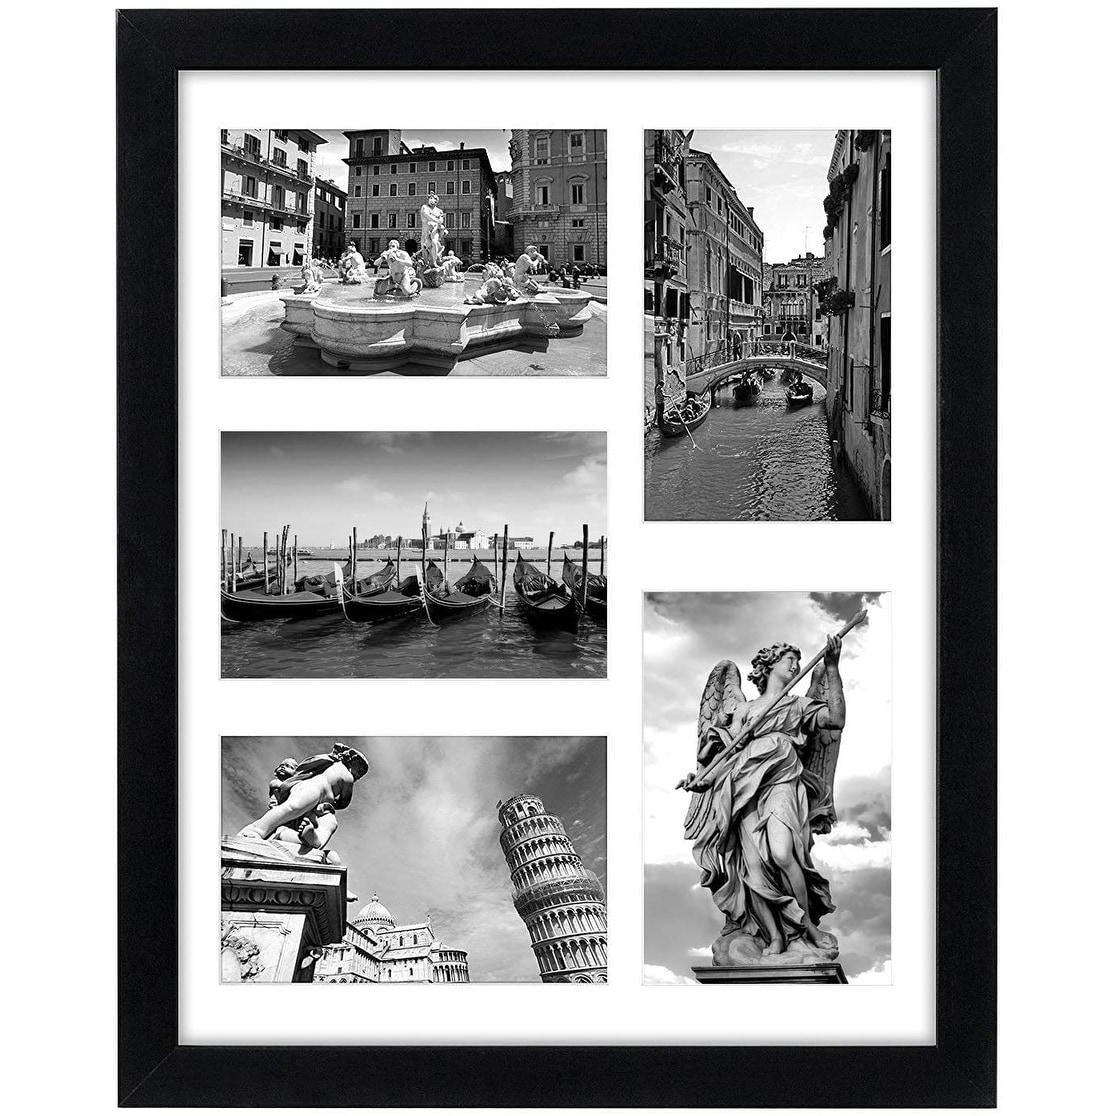 White 12x12 inch Square Photo Wood Collage Frames for Four 4x6